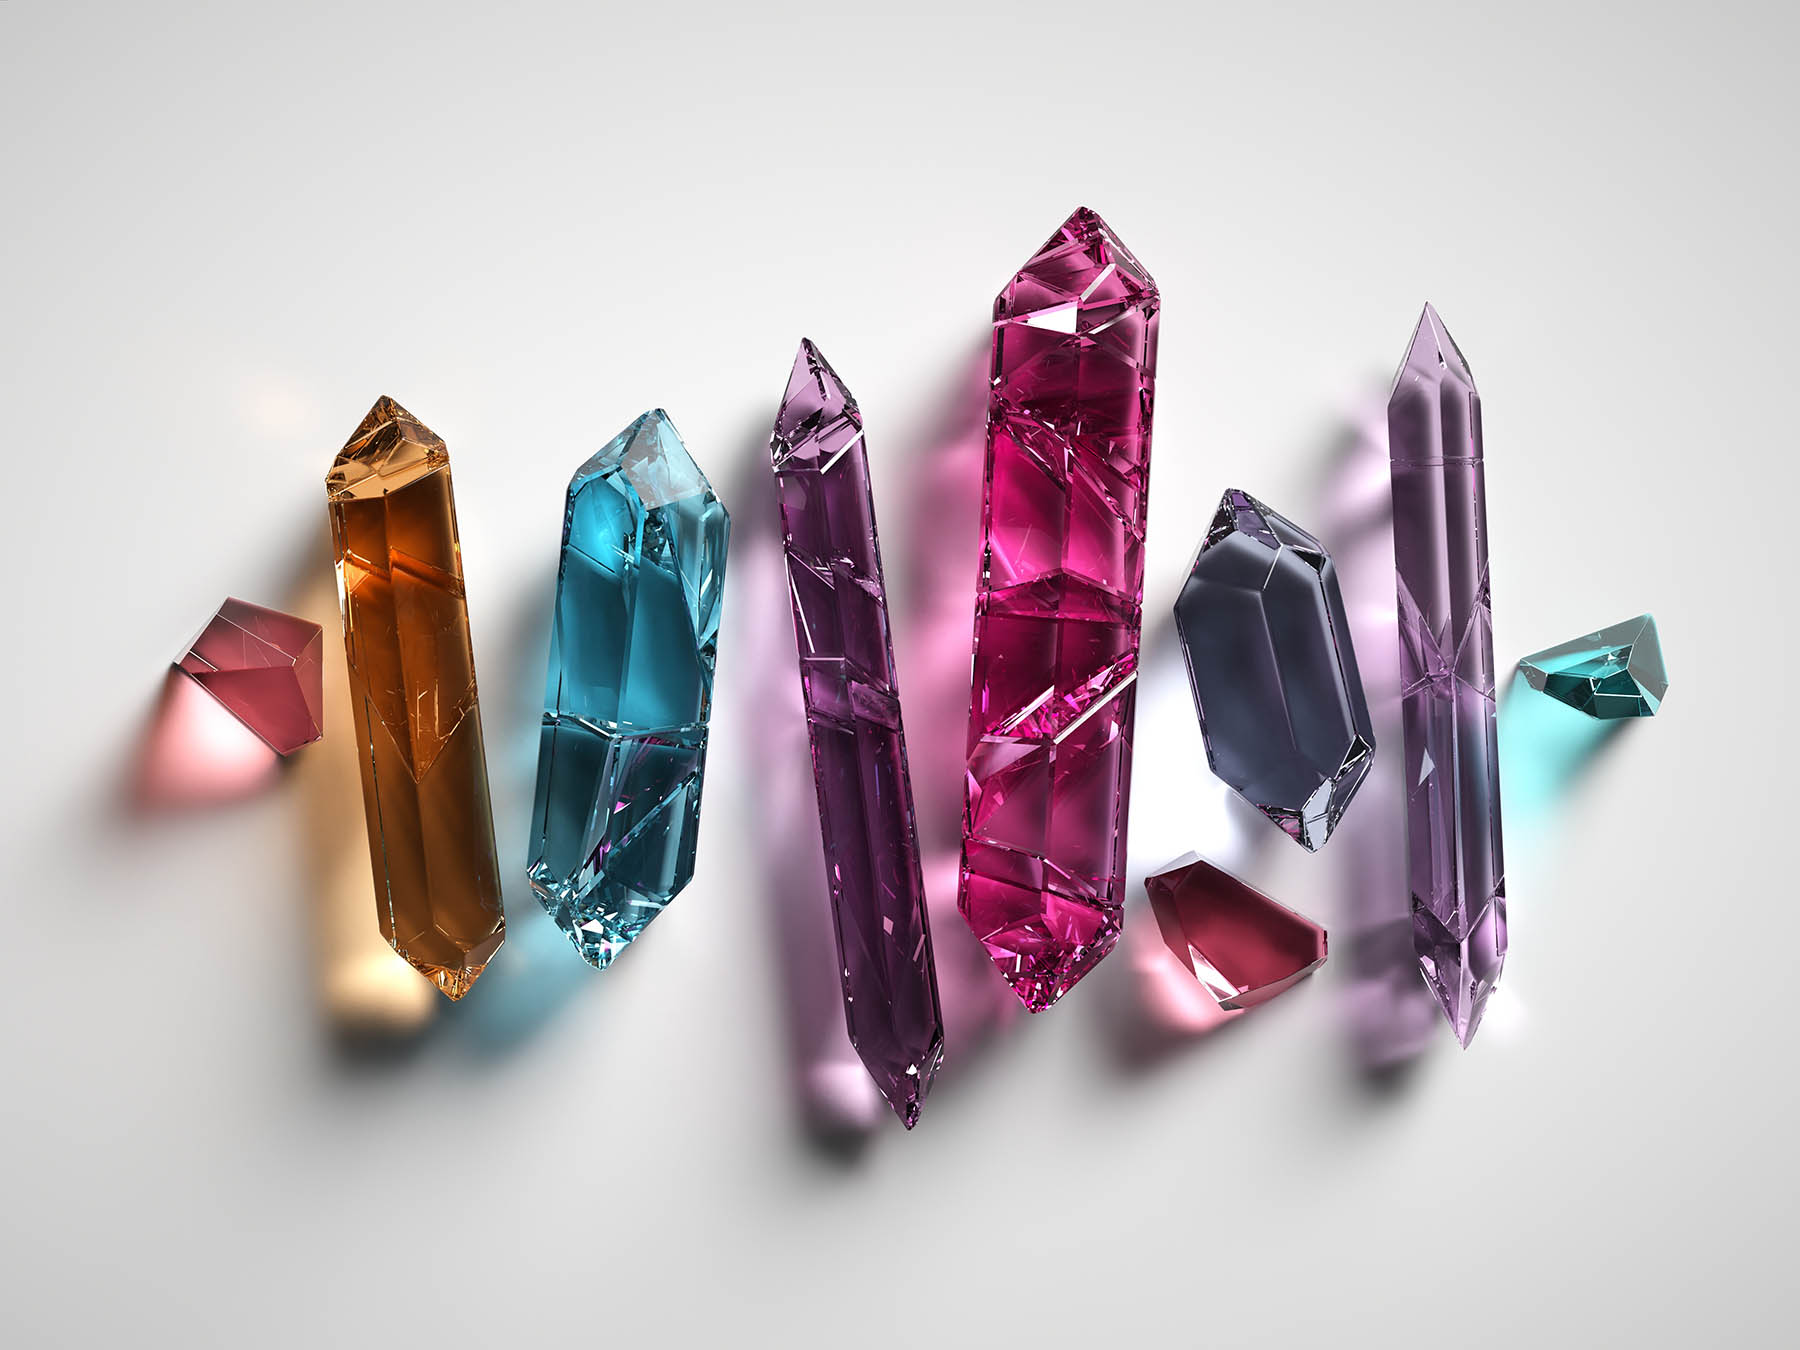 Crystal Pipes for Smoking: Beauty, Energetics, and Functionality